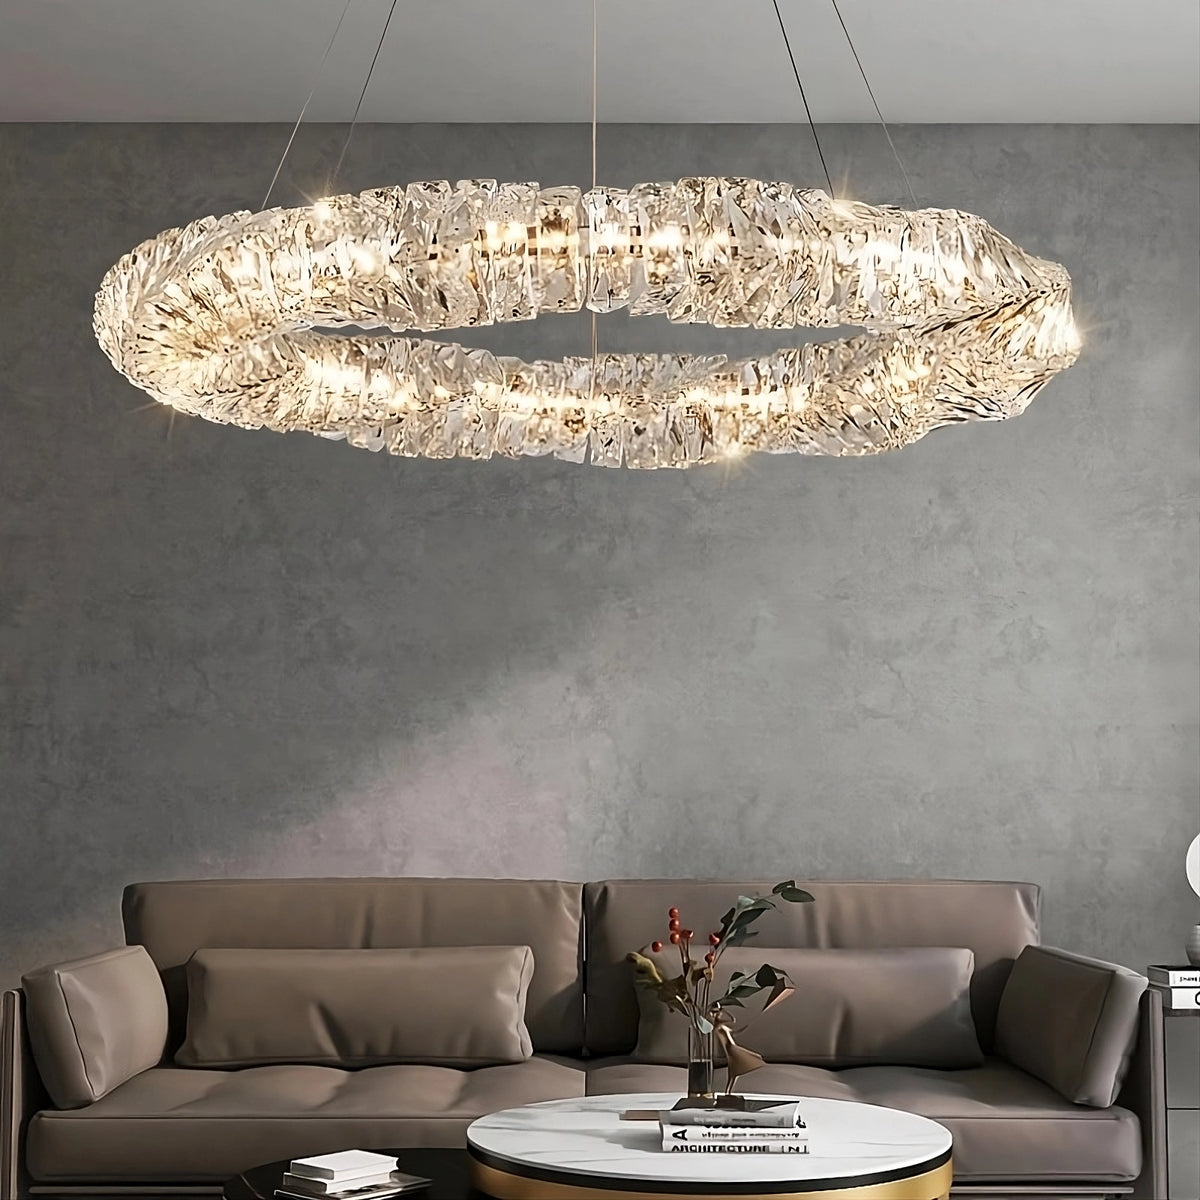 40" Bacci Crystal Ring Chandelier